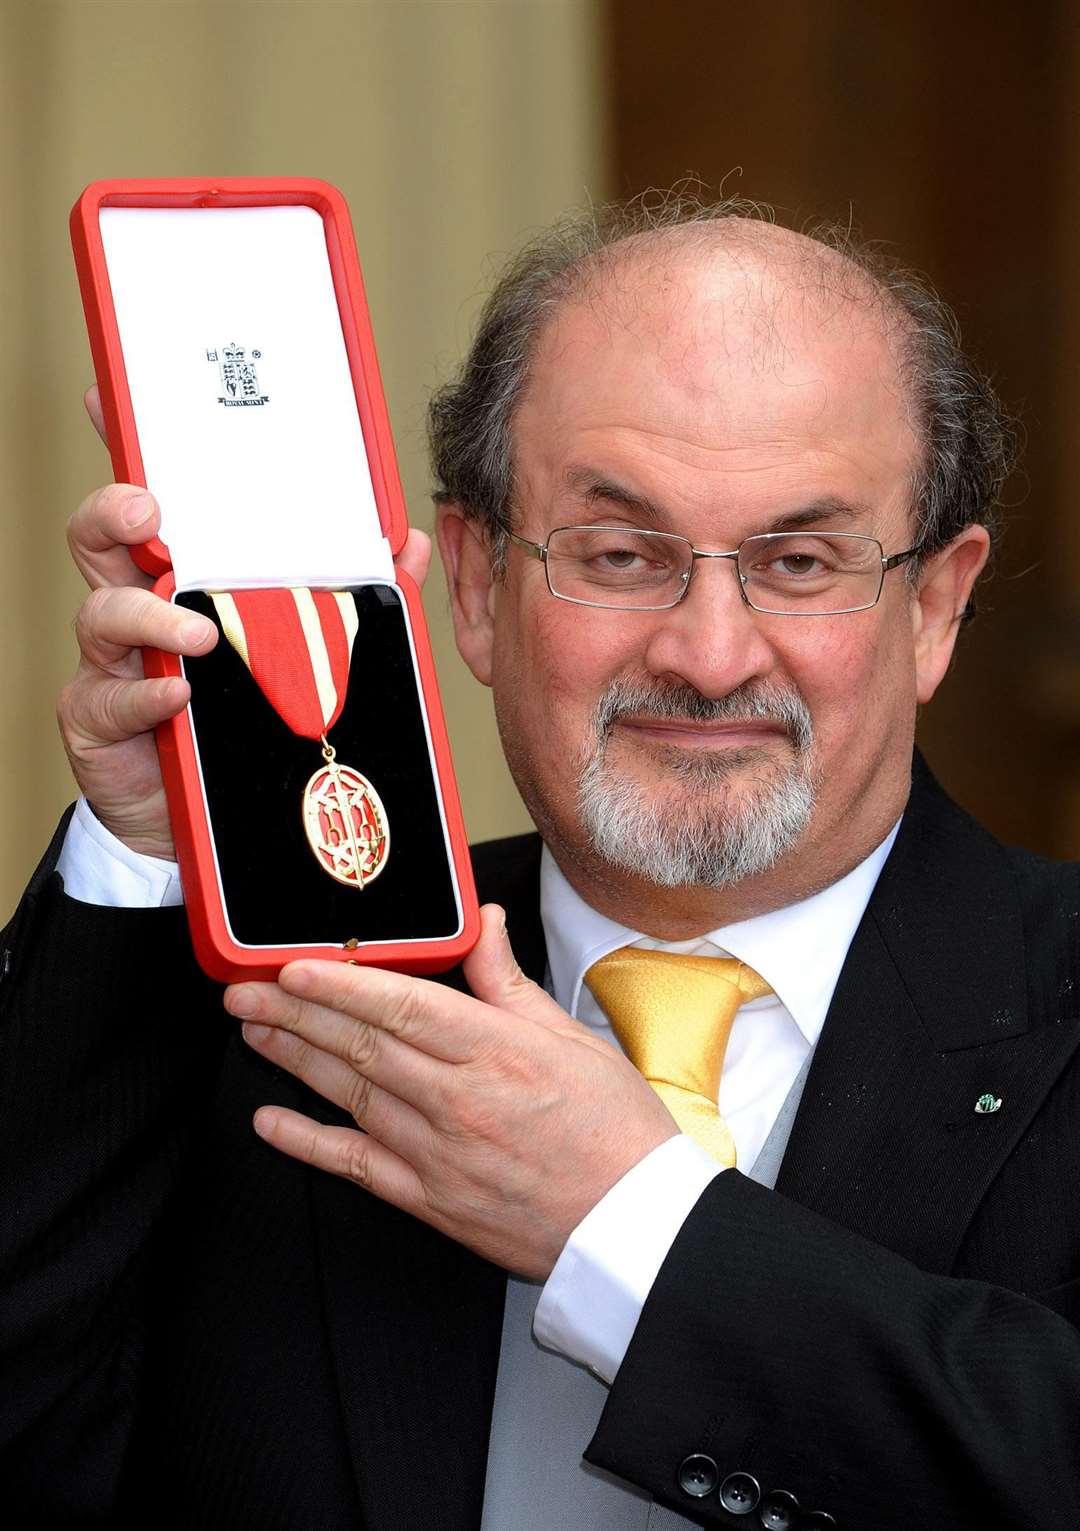 Sir Salman Rushdie after receiving his knighthood from the Queen in 2008 (John Stillwell/PA)